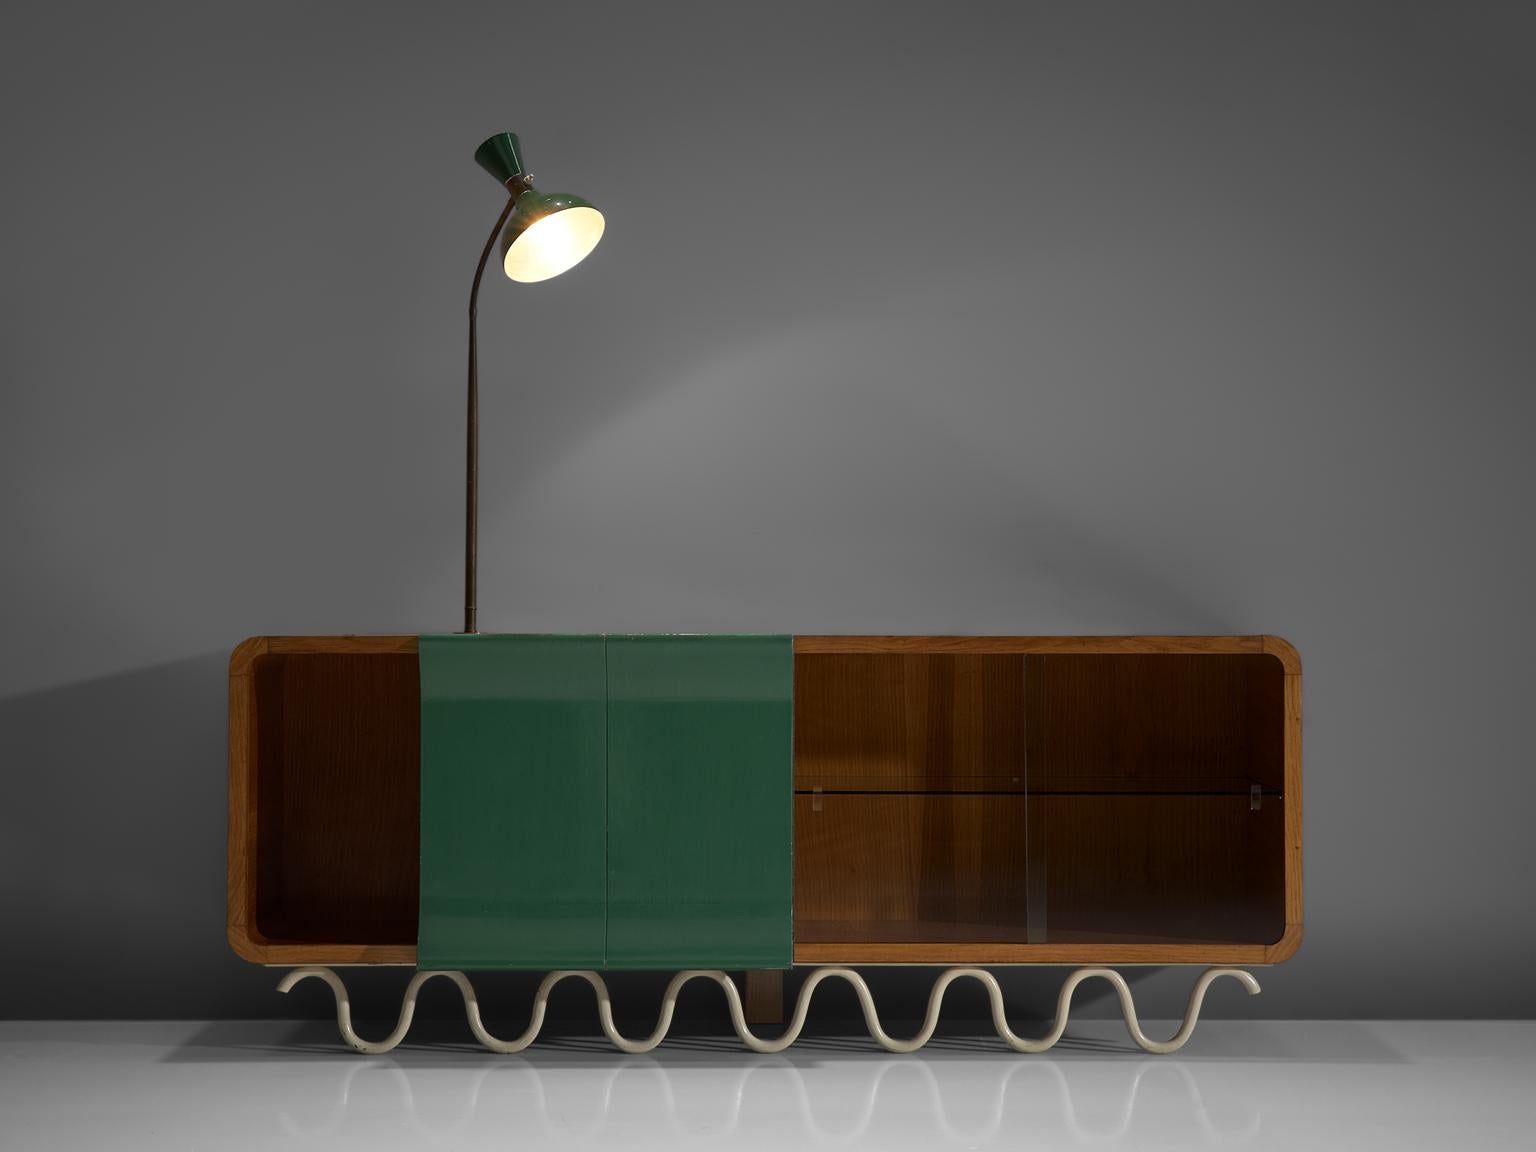 Italian sideboard with attached lamp, walnut, brass, glass, Italy, 1950s

Playful Italian walnut sideboard with green lacquered doors, and partial glass sliding doors, and on top an attached table lamp with adjustable stem. Most remarkable detail